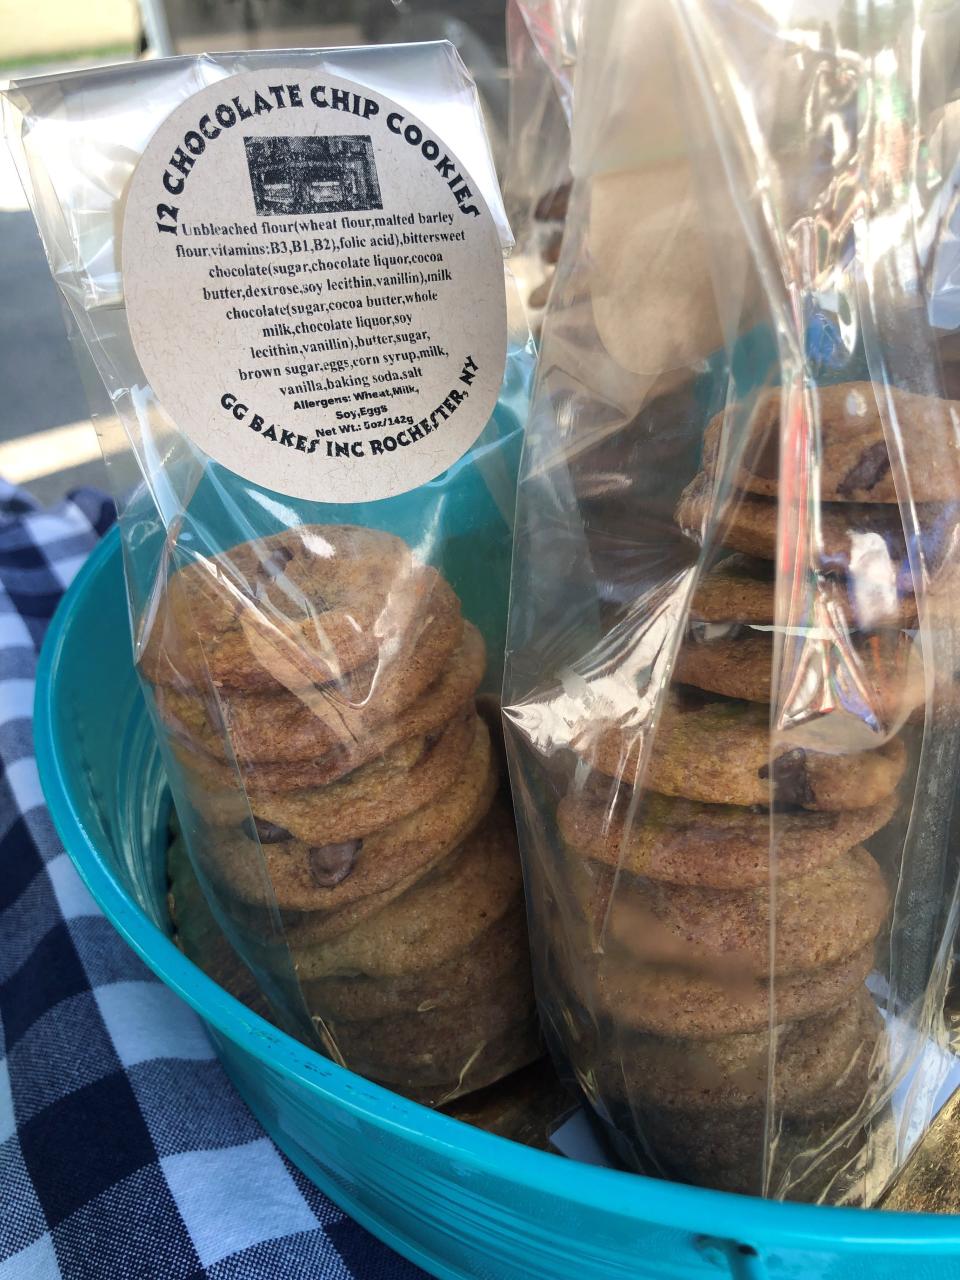 Small cookies are among the offerings from GG Bakes at the Westside Farmers Market in Rochester.